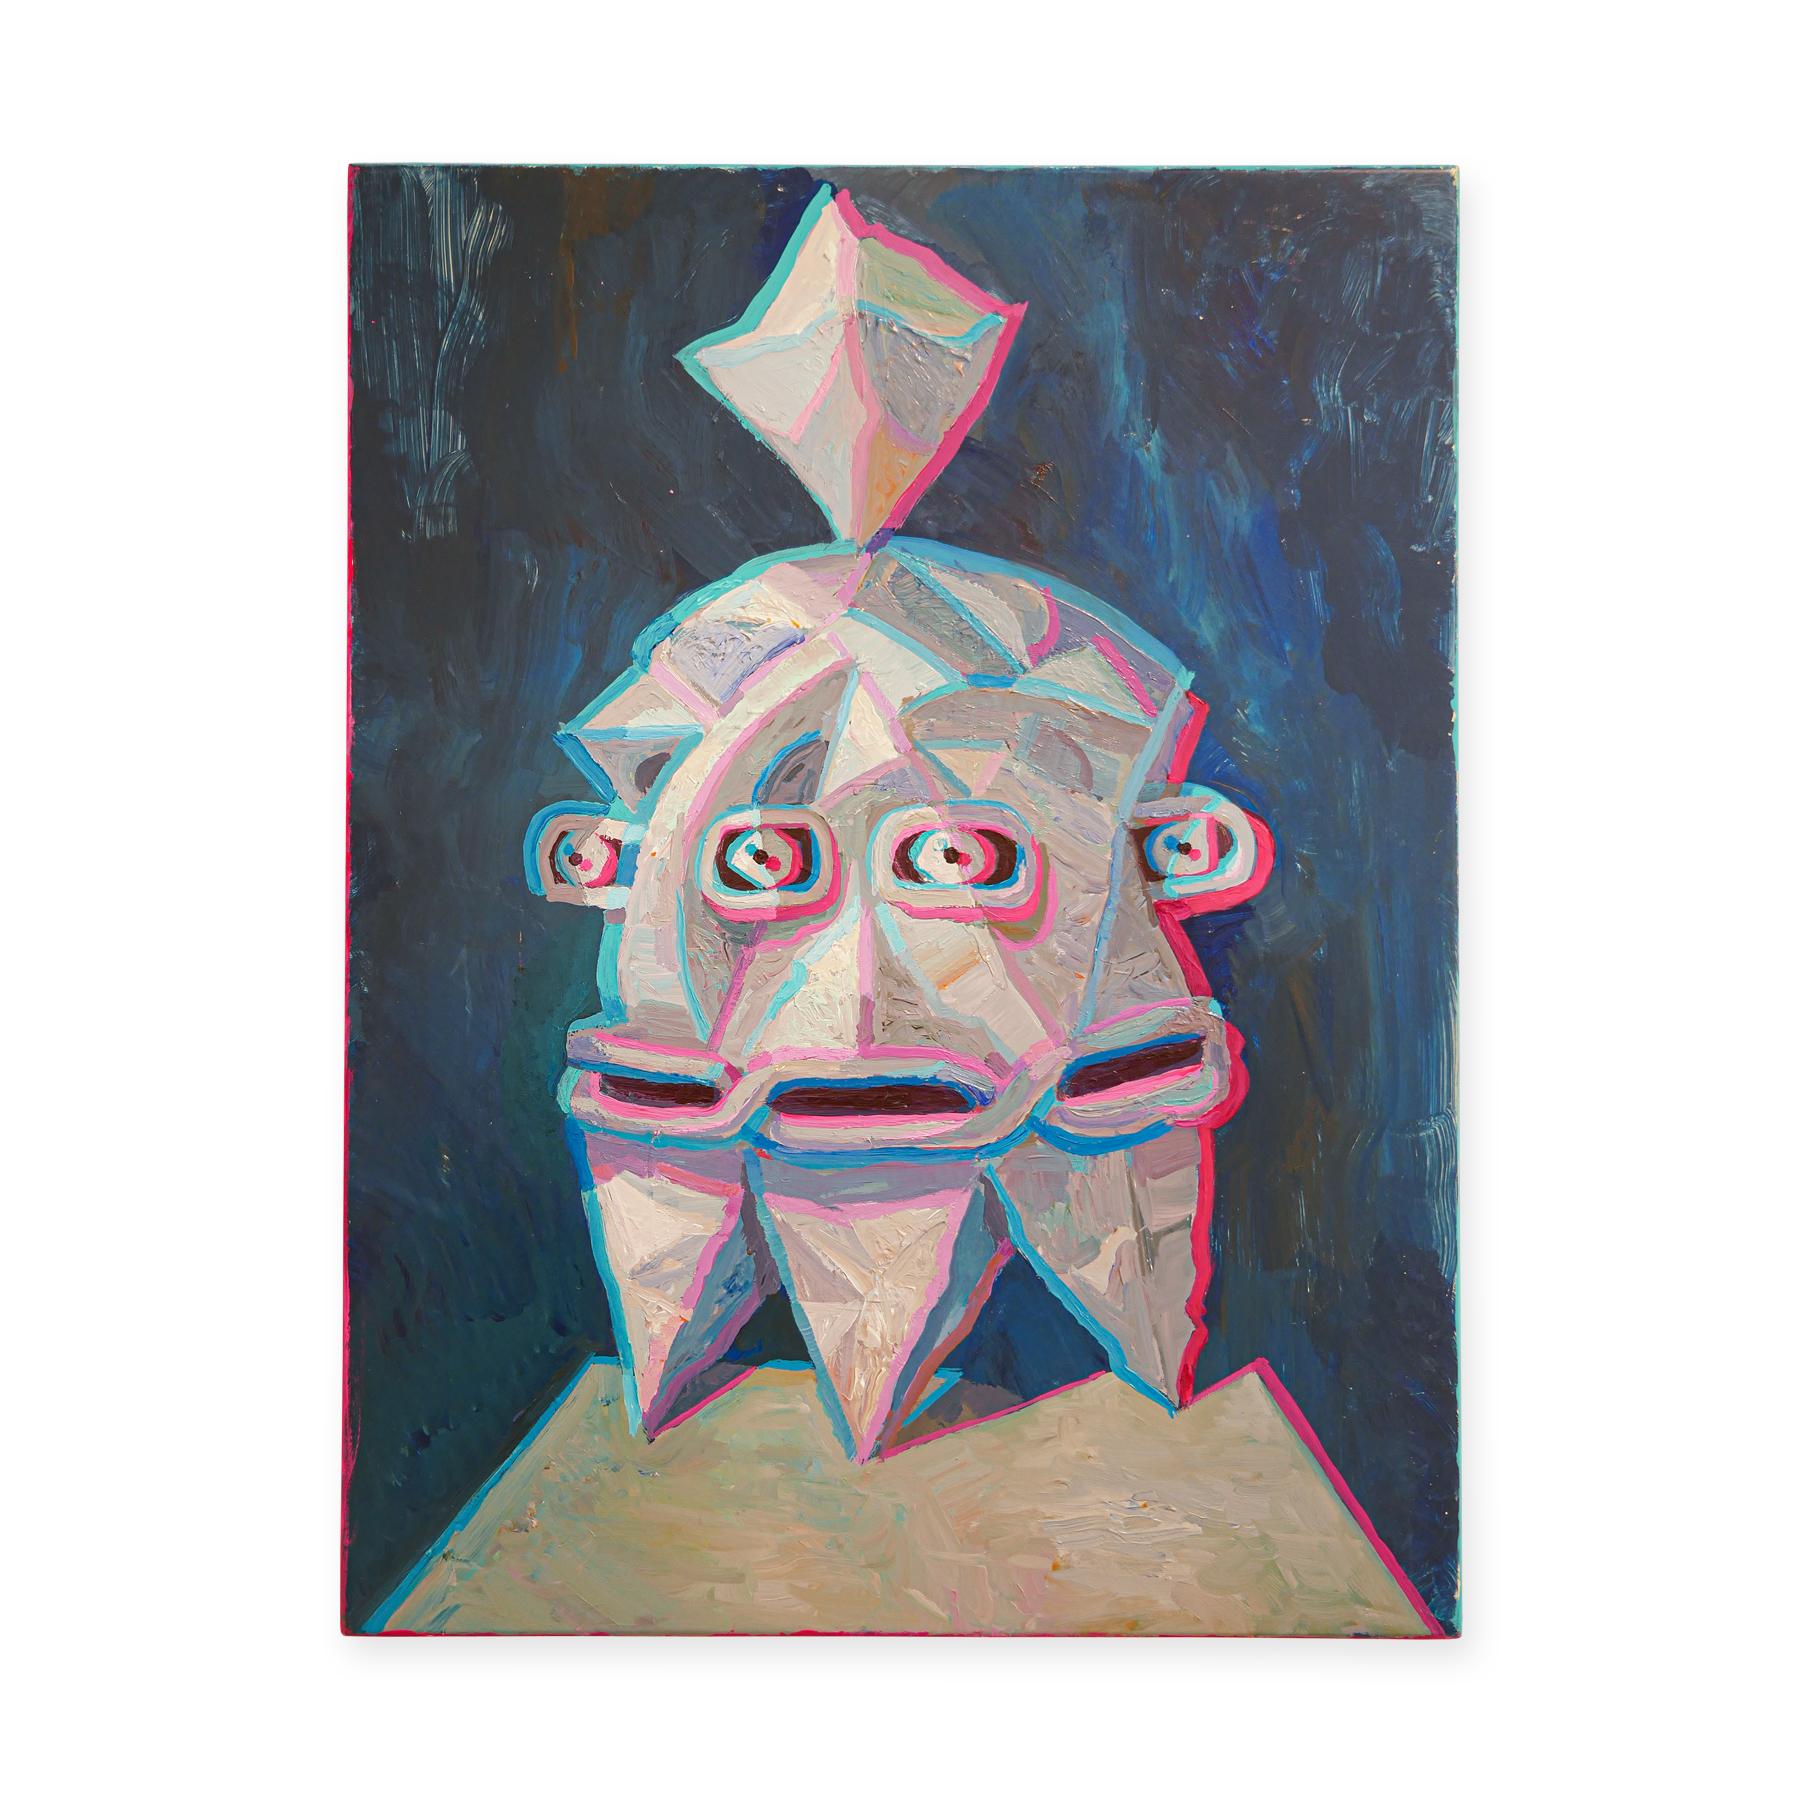 Dark blue, neon pink, and white anaglyph painting by San Francisco-based artist Robert MacKenzie. This piece is included in a 2023 group exhibition, 